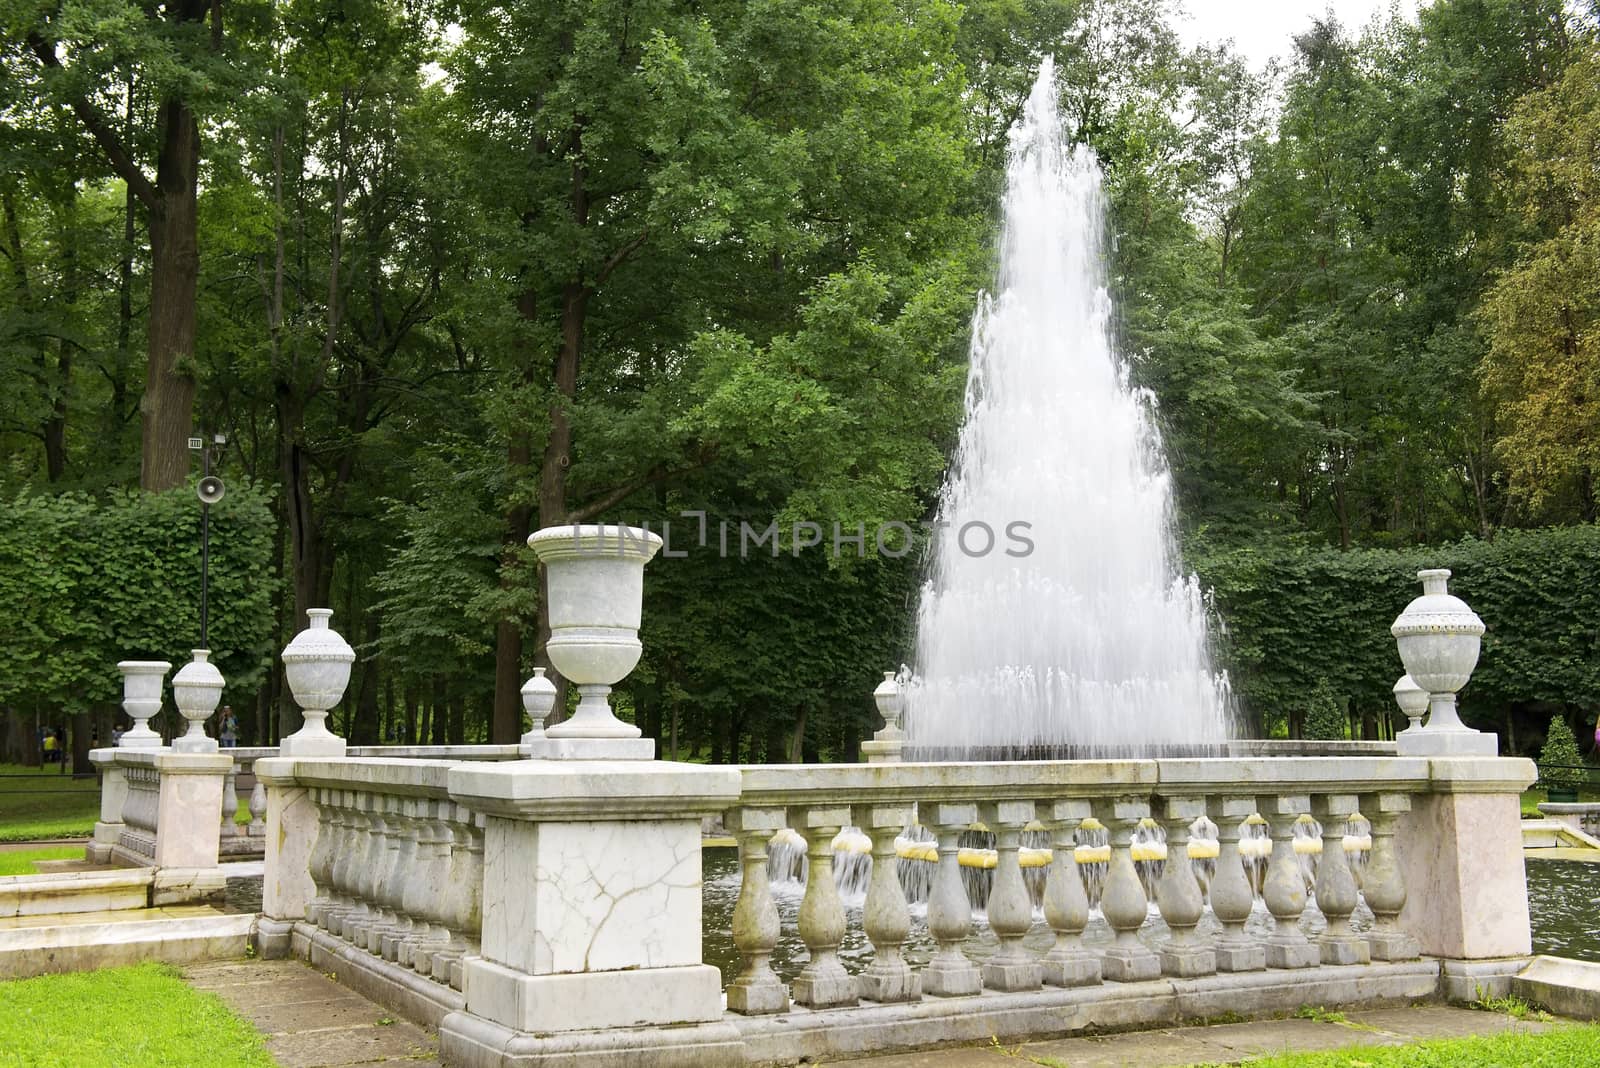 Fountain "Pyramid" in the Lower Park of Petergof, Saint Petersburg, Russia